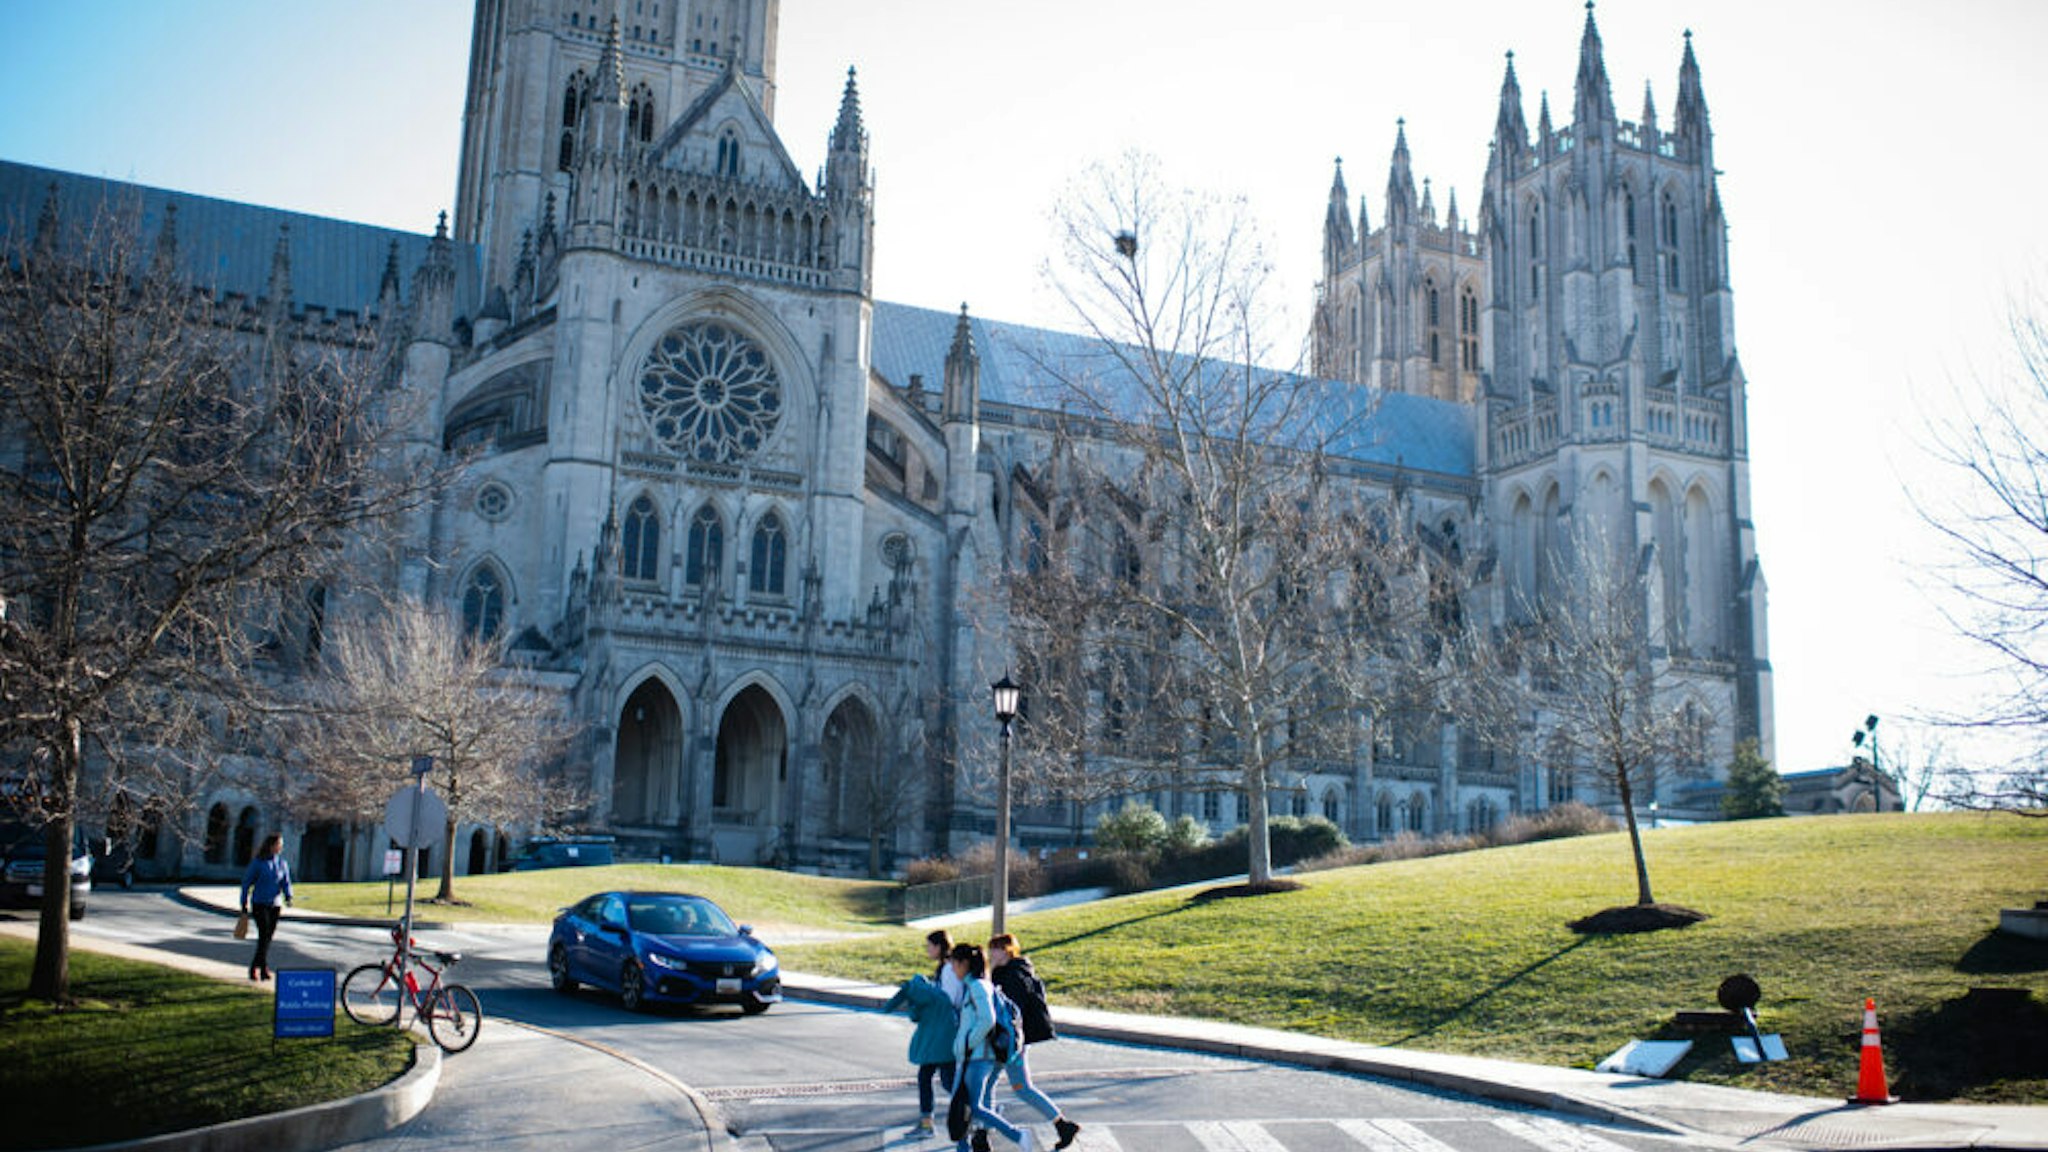 WASHINGTON, DC - JANUARY 25: People walk near Washington National Cathedral. Massachusetts Avenue Heights is a neighborhood in DC that is bounded to the north by Woodley Road, to the southwest by Massachusetts Avenue, to the east by 34th Street NW, and to the west by Wisconsin Avenue. (Photo by Sarah L. Voisin/The Washington Post via Getty Images)